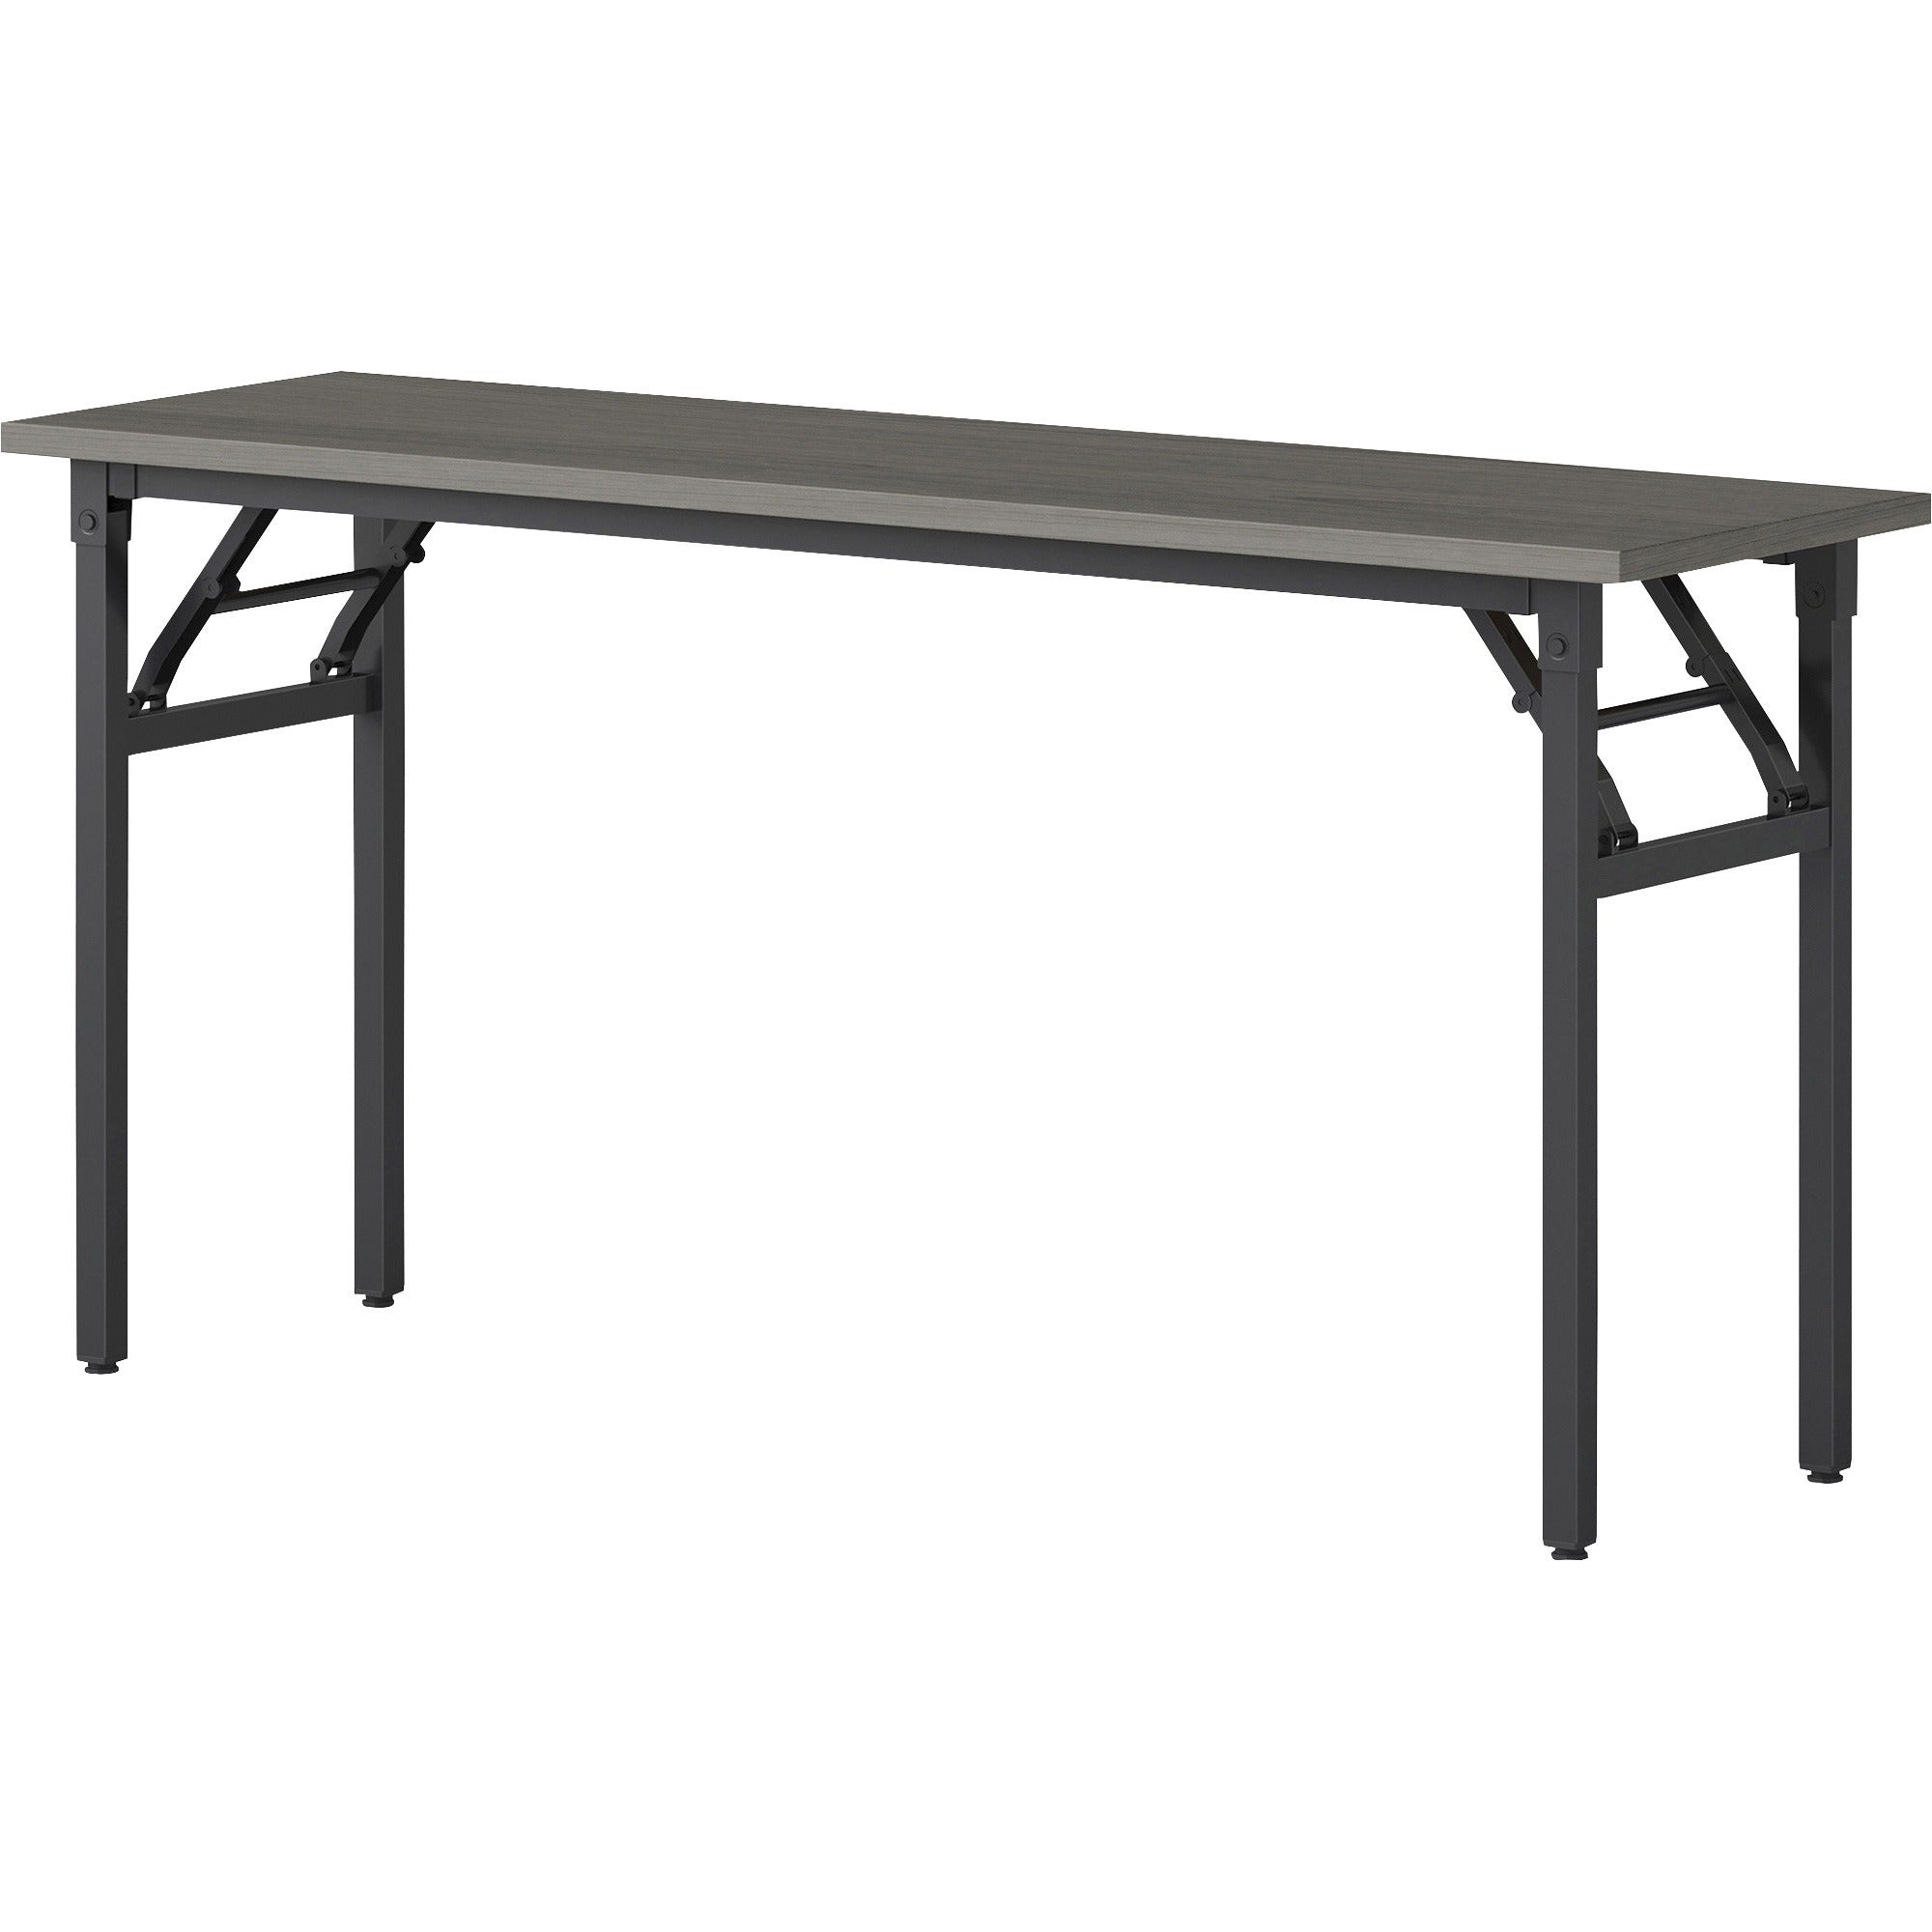 lorell-folding-training-table-for-table-topmelamine-top-x-60-table-top-width-x-18-table-top-depth-x-1-table-top-thickness-30-height-assembly-required-gray-1-each_llr60746 - 4